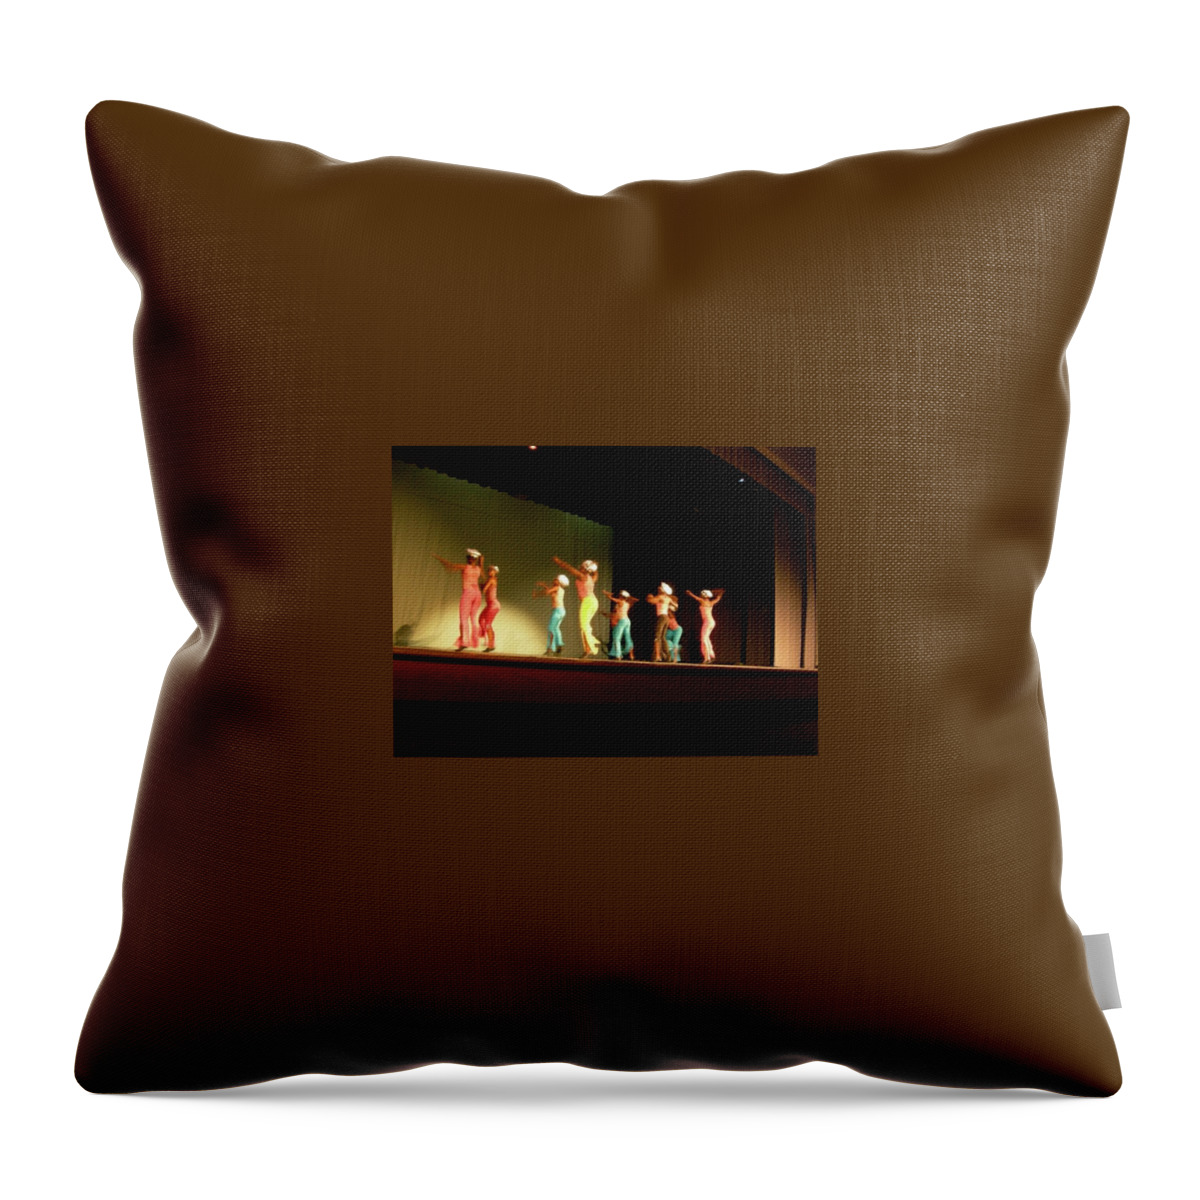 Dancers Throw Pillow featuring the painting Jamboreee5 by Trevor A Smith